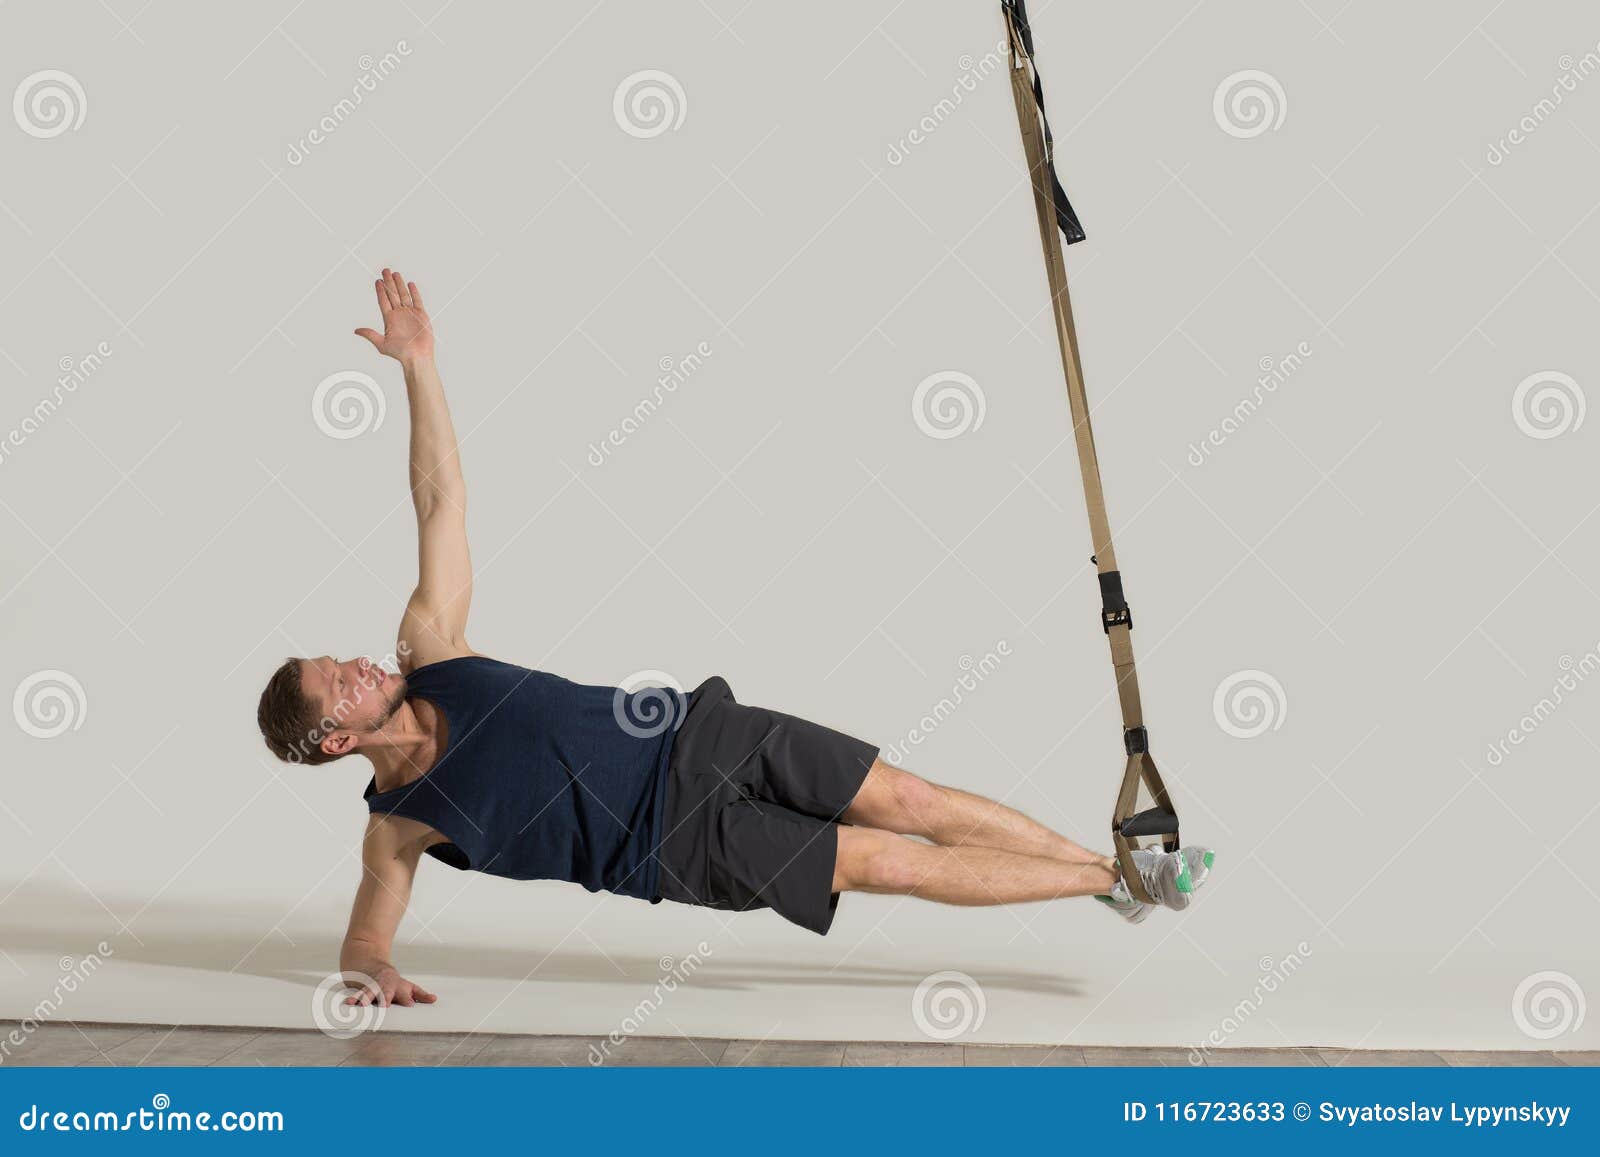 Download Body TRX Training At Elastic Rope At Gym Stock Image ...